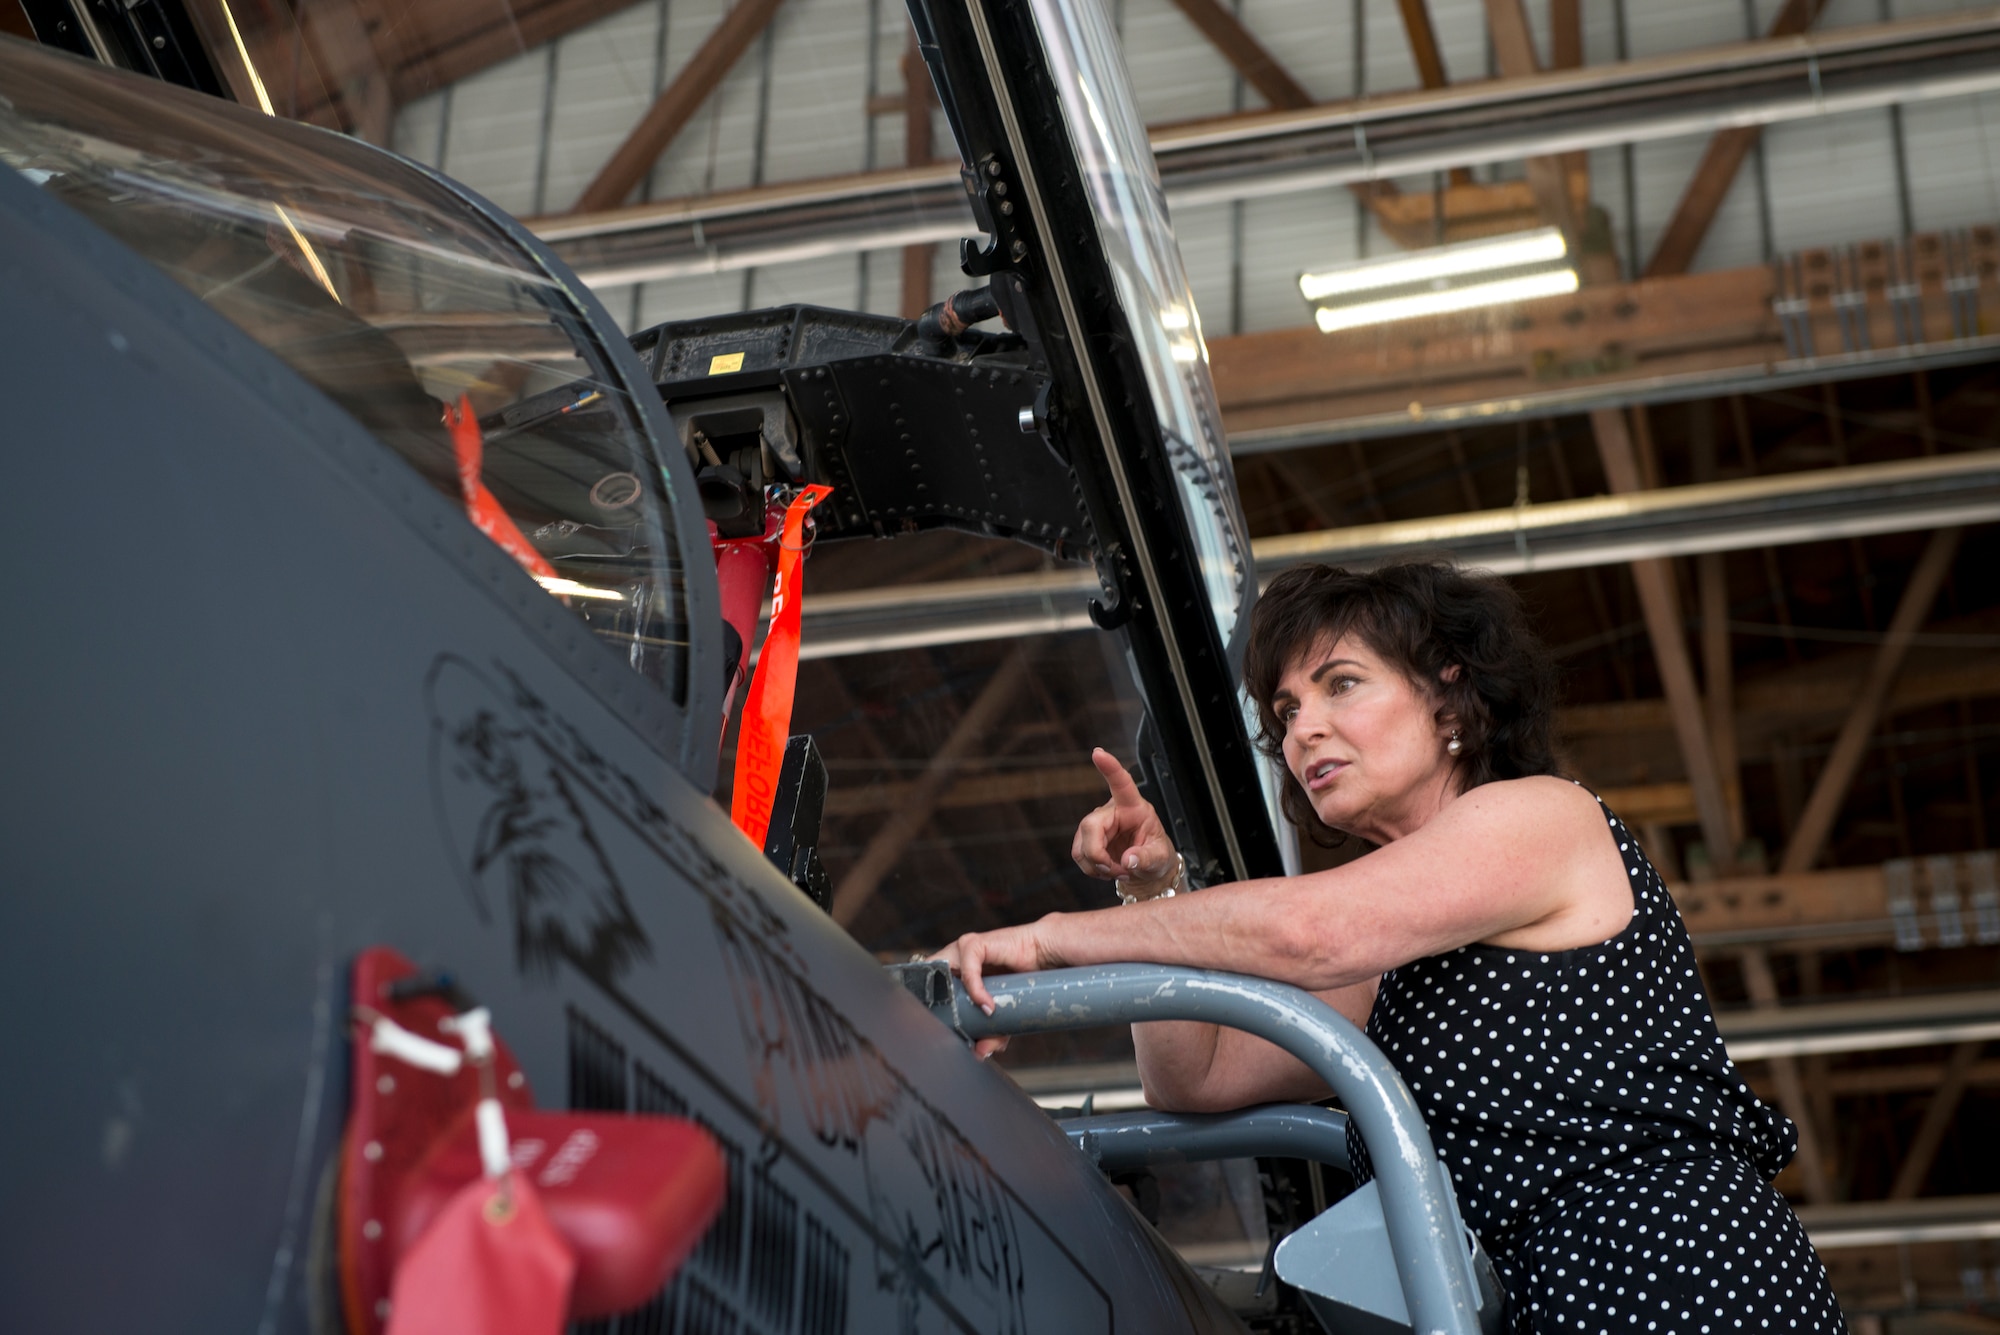 Janine Sijan-Rozina, Capt. Lance P. Sijan’s sister, looks into the cockpit of an F-15E Strike Eagle, May 30, 2019 at Mountain Home Air Force Base, Idaho. Sijan-Rozina visited several locations on base during the two-day MHAFB premiere of the documentary “SIJAN” and spoke to next-generation Gunfighters about her brother’s story. (U.S Air Force photo by Airman 1st Class JaNae Capuno)